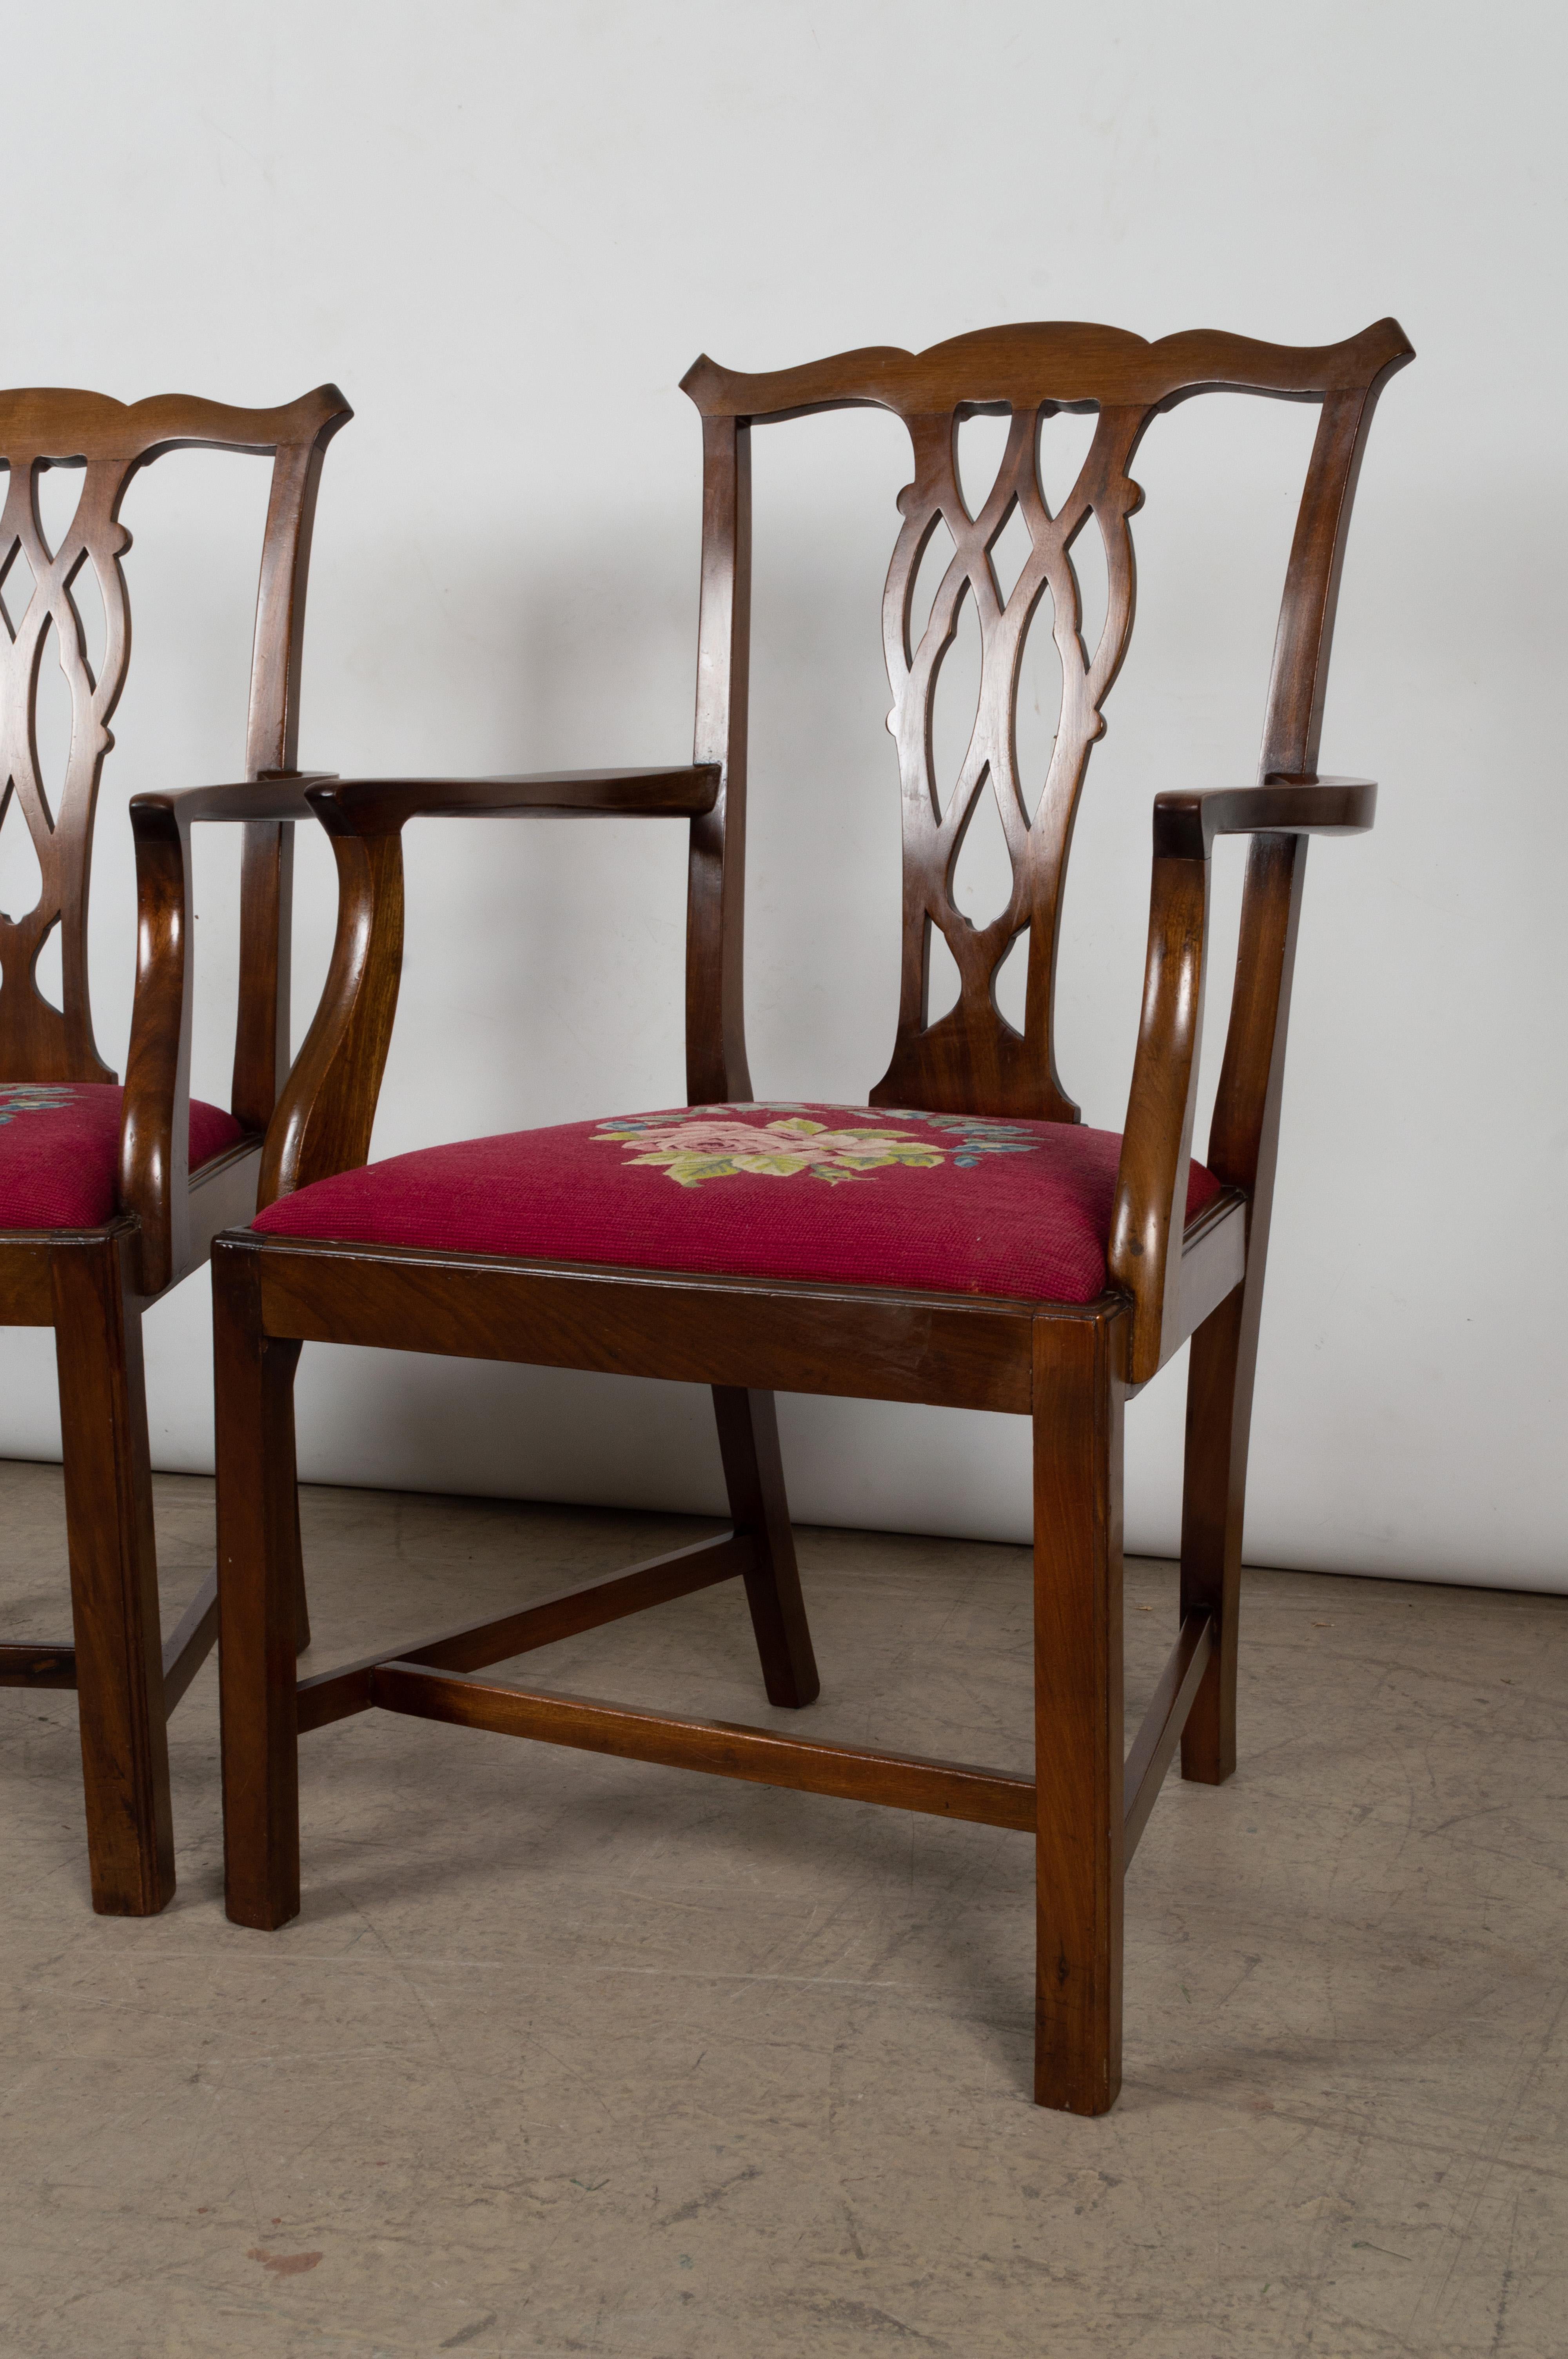 19th Century 6 Antique English Victorian Chippendale Revival Mahogany Dining Chairs For Sale